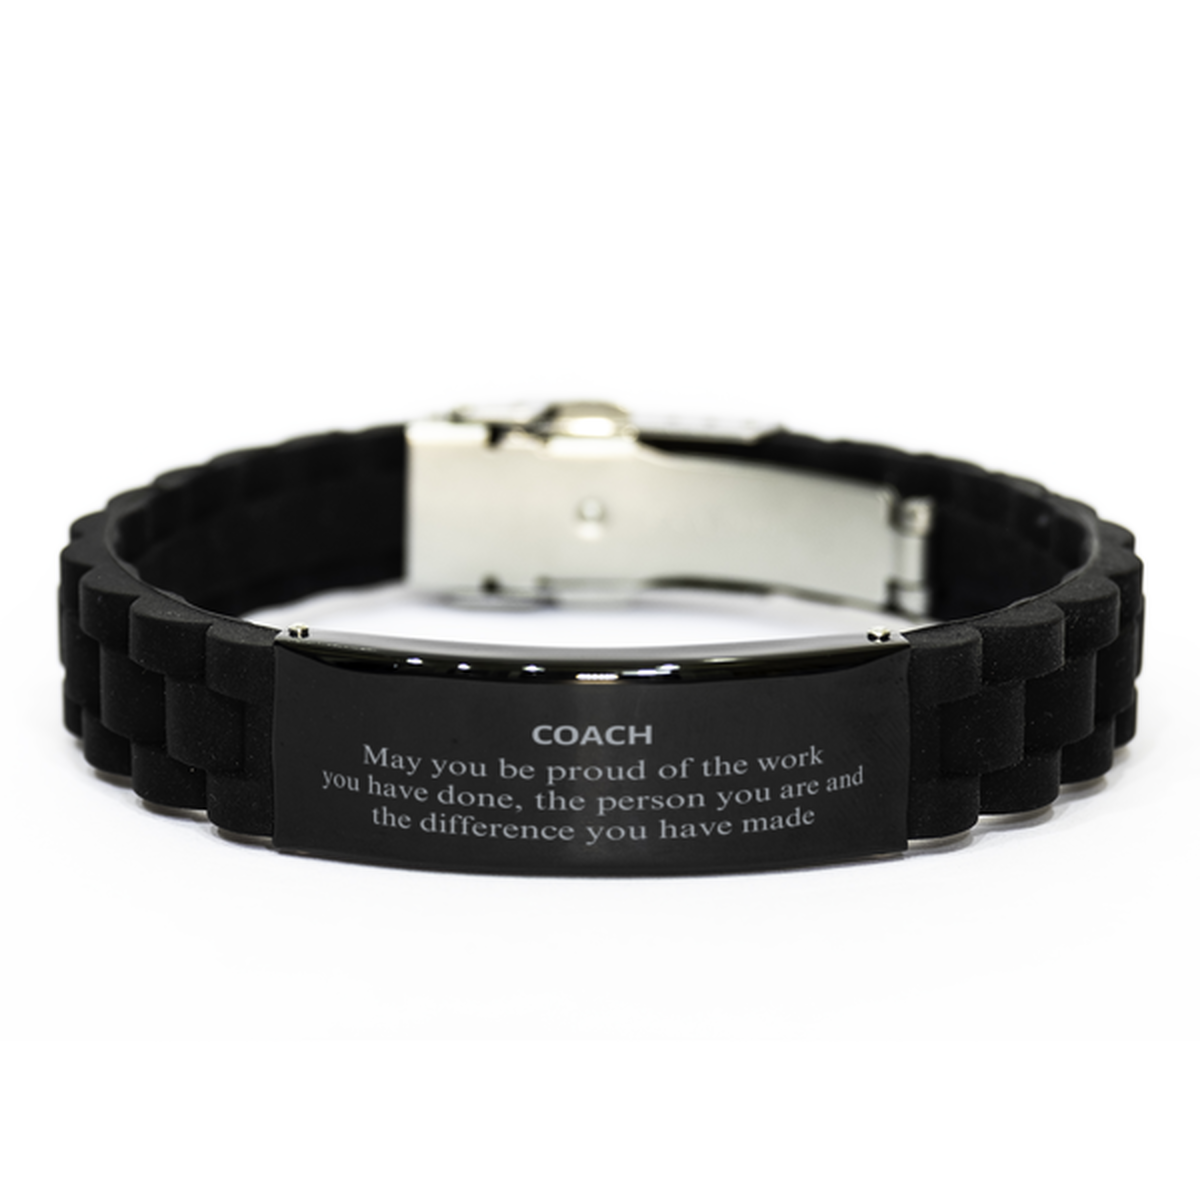 Coach May you be proud of the work you have done, Retirement Coach Black Glidelock Clasp Bracelet for Colleague Appreciation Gifts Amazing for Coach